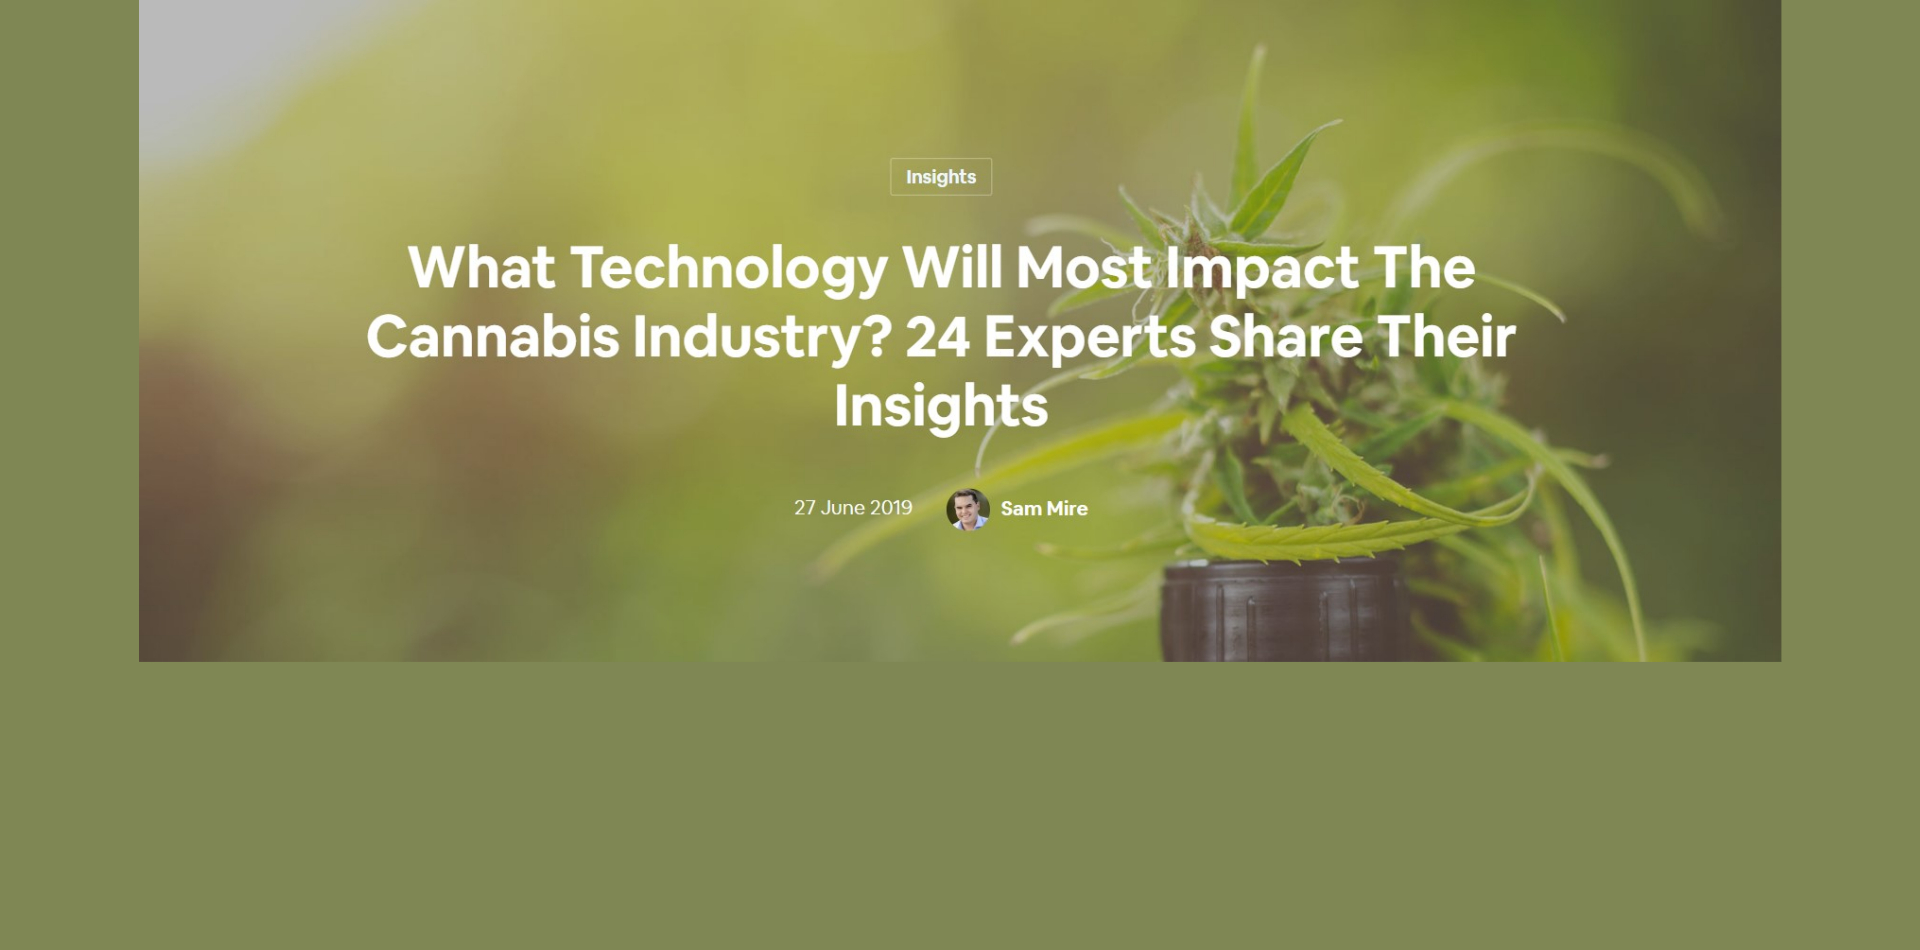 What Technology Will Most Impact The Cannabis Industry? 24 Experts Share Their Insights